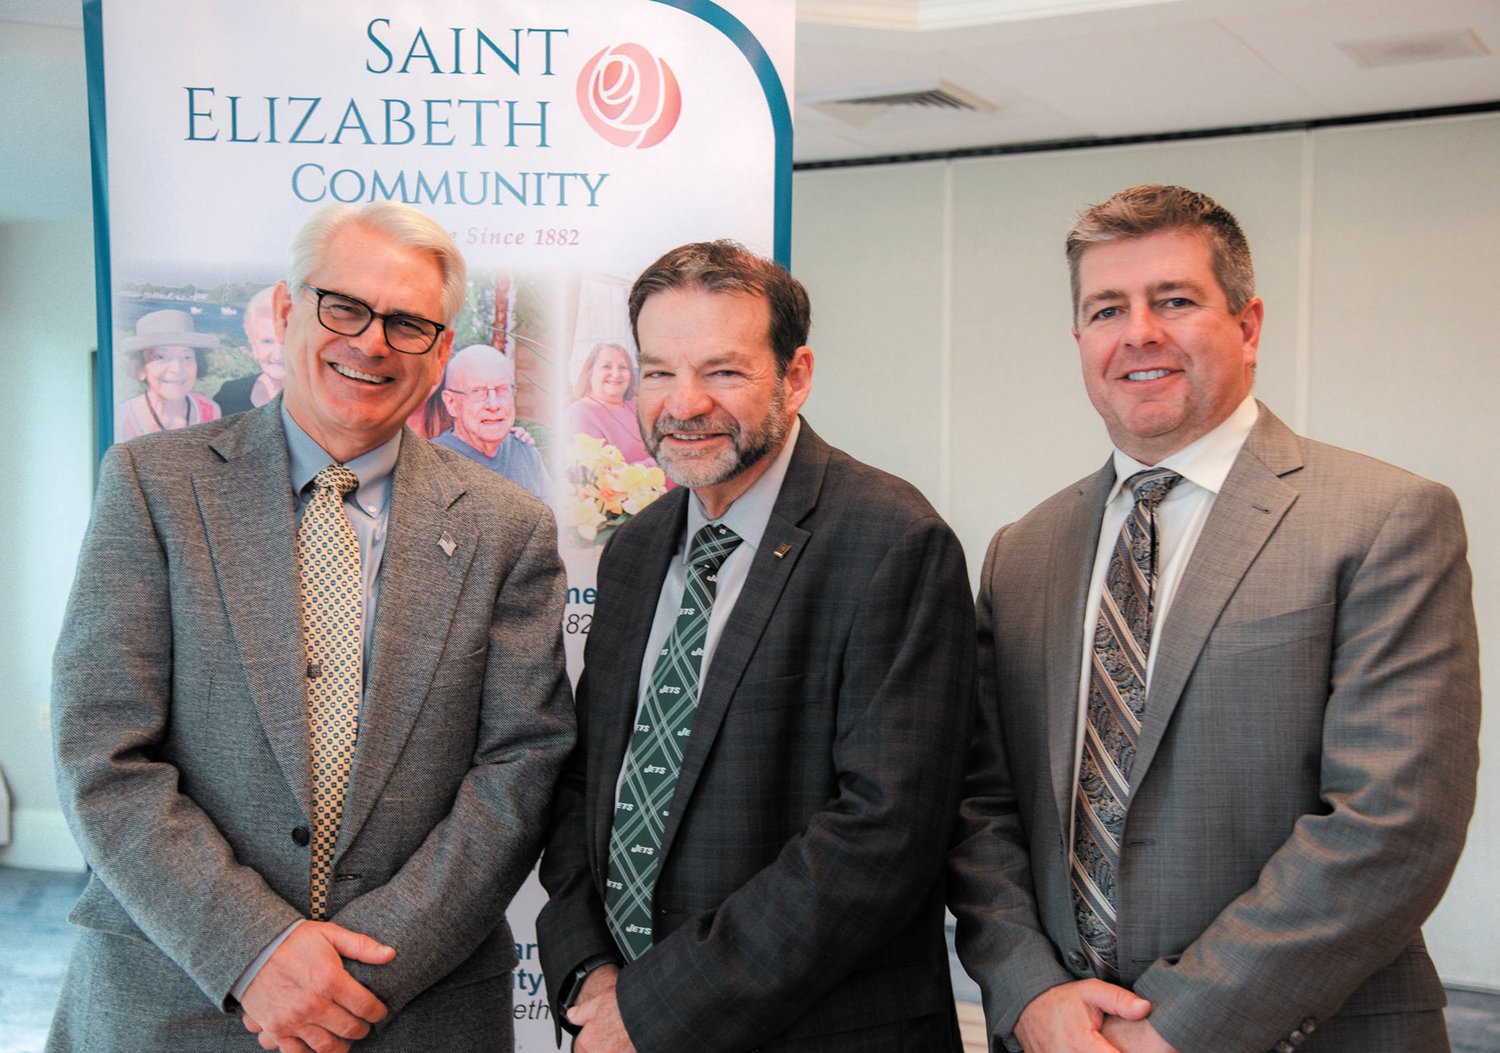 CONGRATS TO THE AWARDEE: Saint Elizabeth Community Board Chair Steve Tilley with retired CEO Steven Horowitz and CEO Matt Trimble.